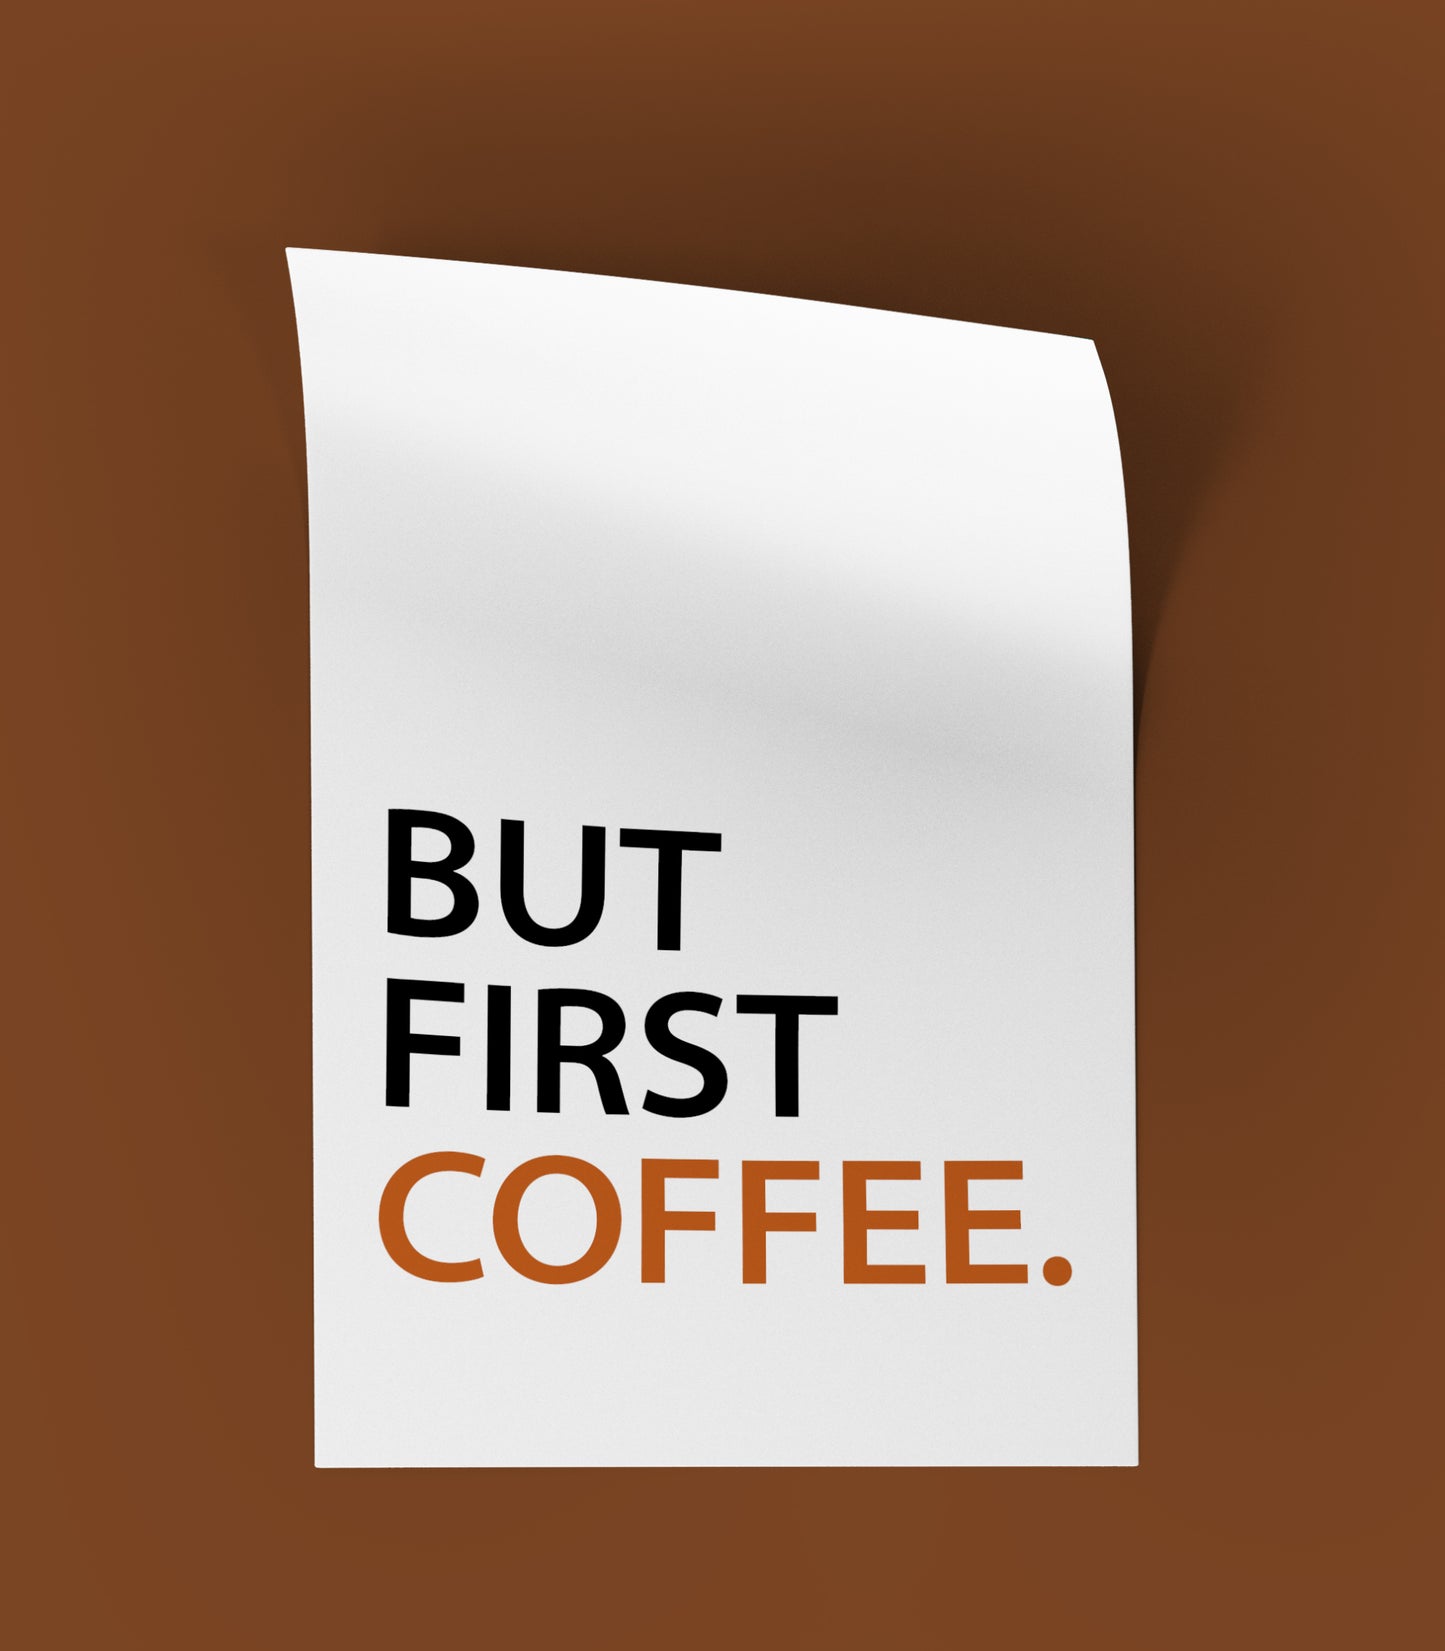 But First Coffee - Motivation Wall Art Print - Print with Frame